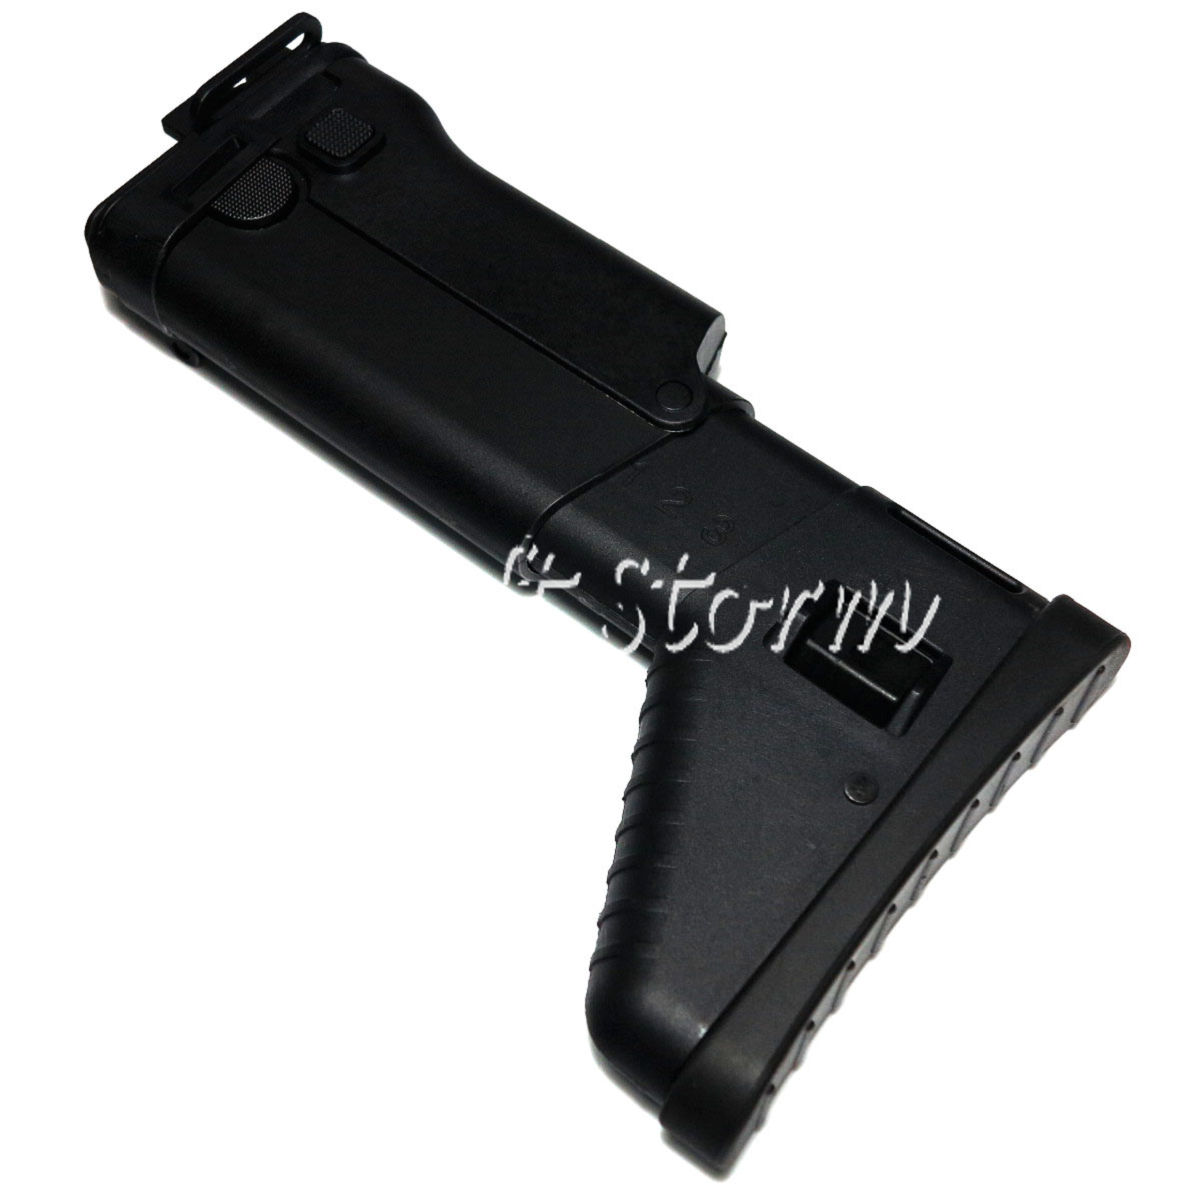 Airsoft Tactical Gear D-Boys Side Folding Retractable Stock for SCAR AEG Black